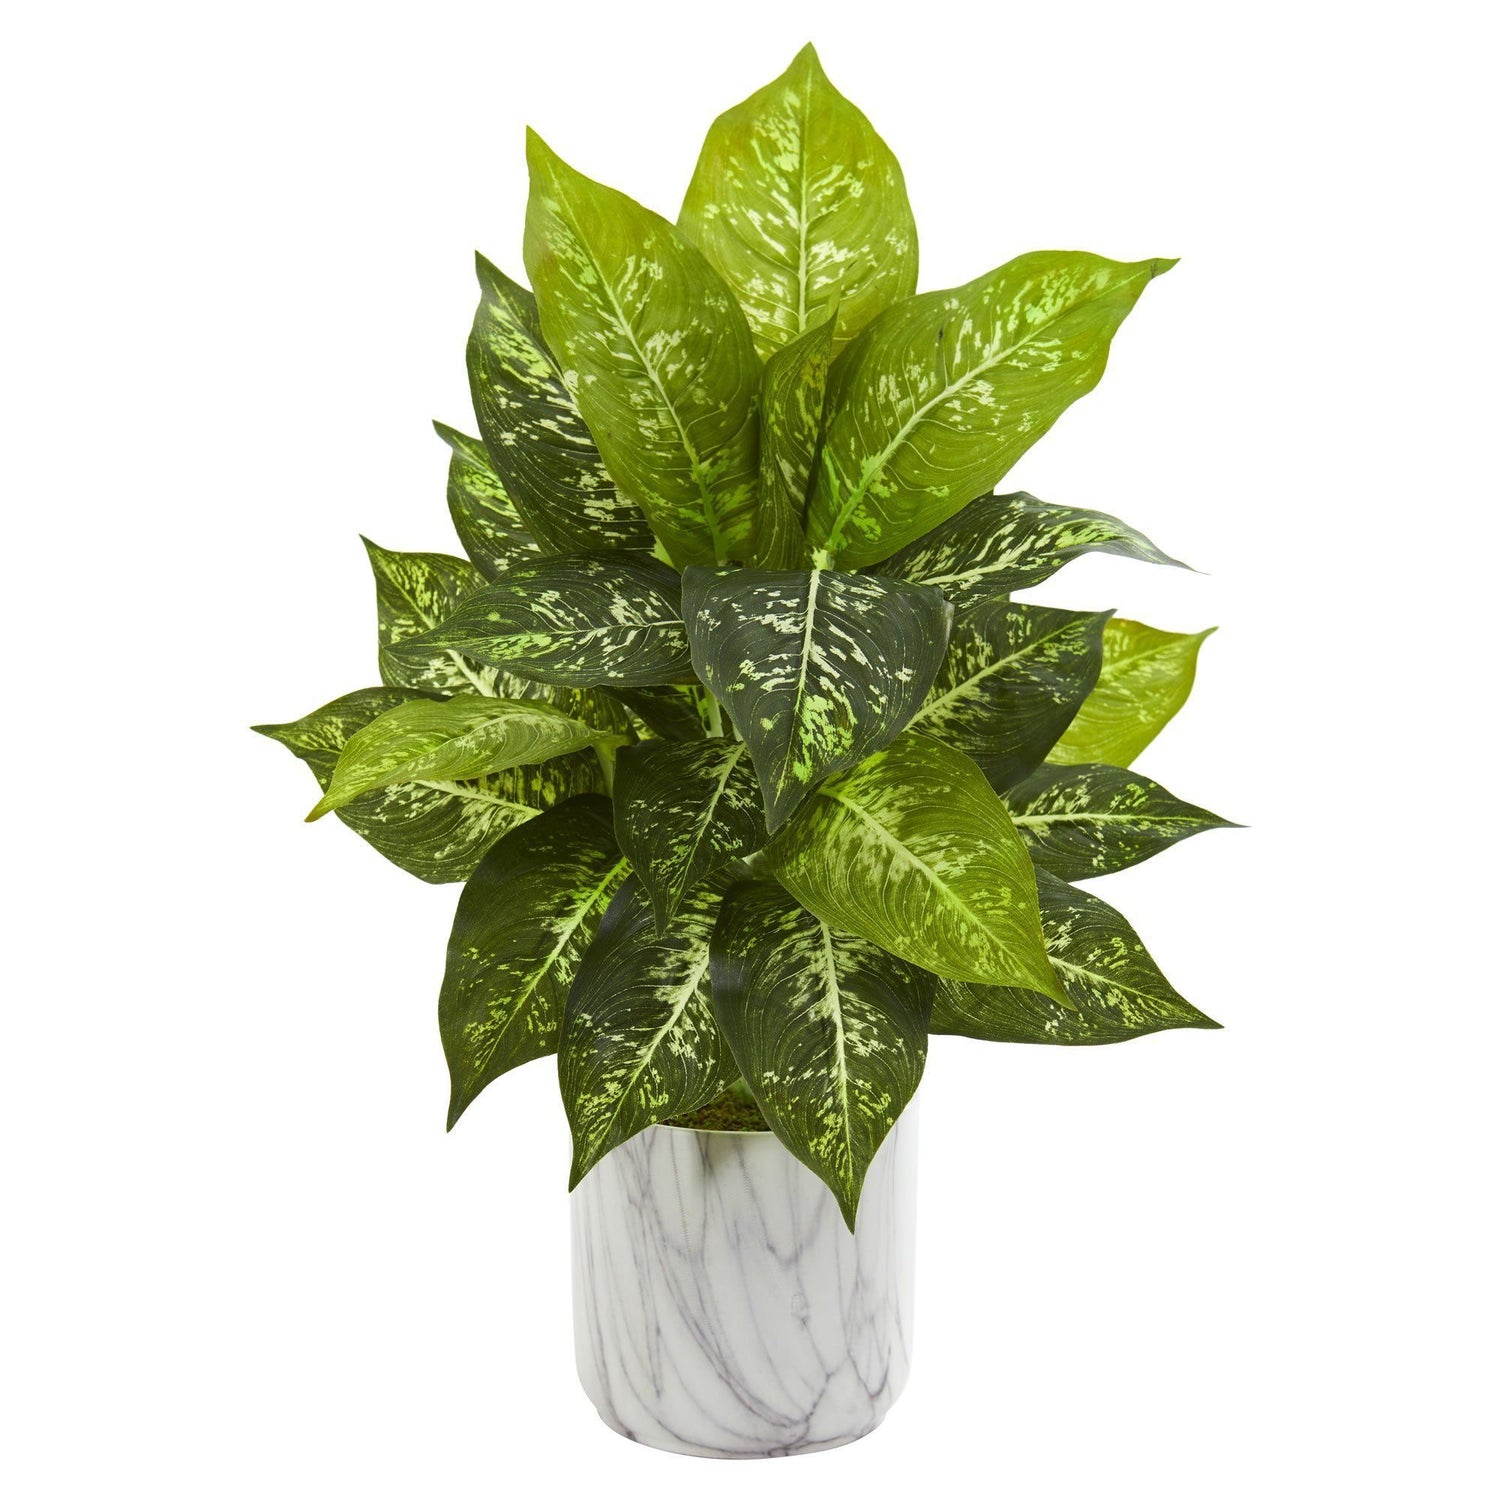 Dieffenbachia Artificial Plant in Marble Finish Planter (Set of 2)